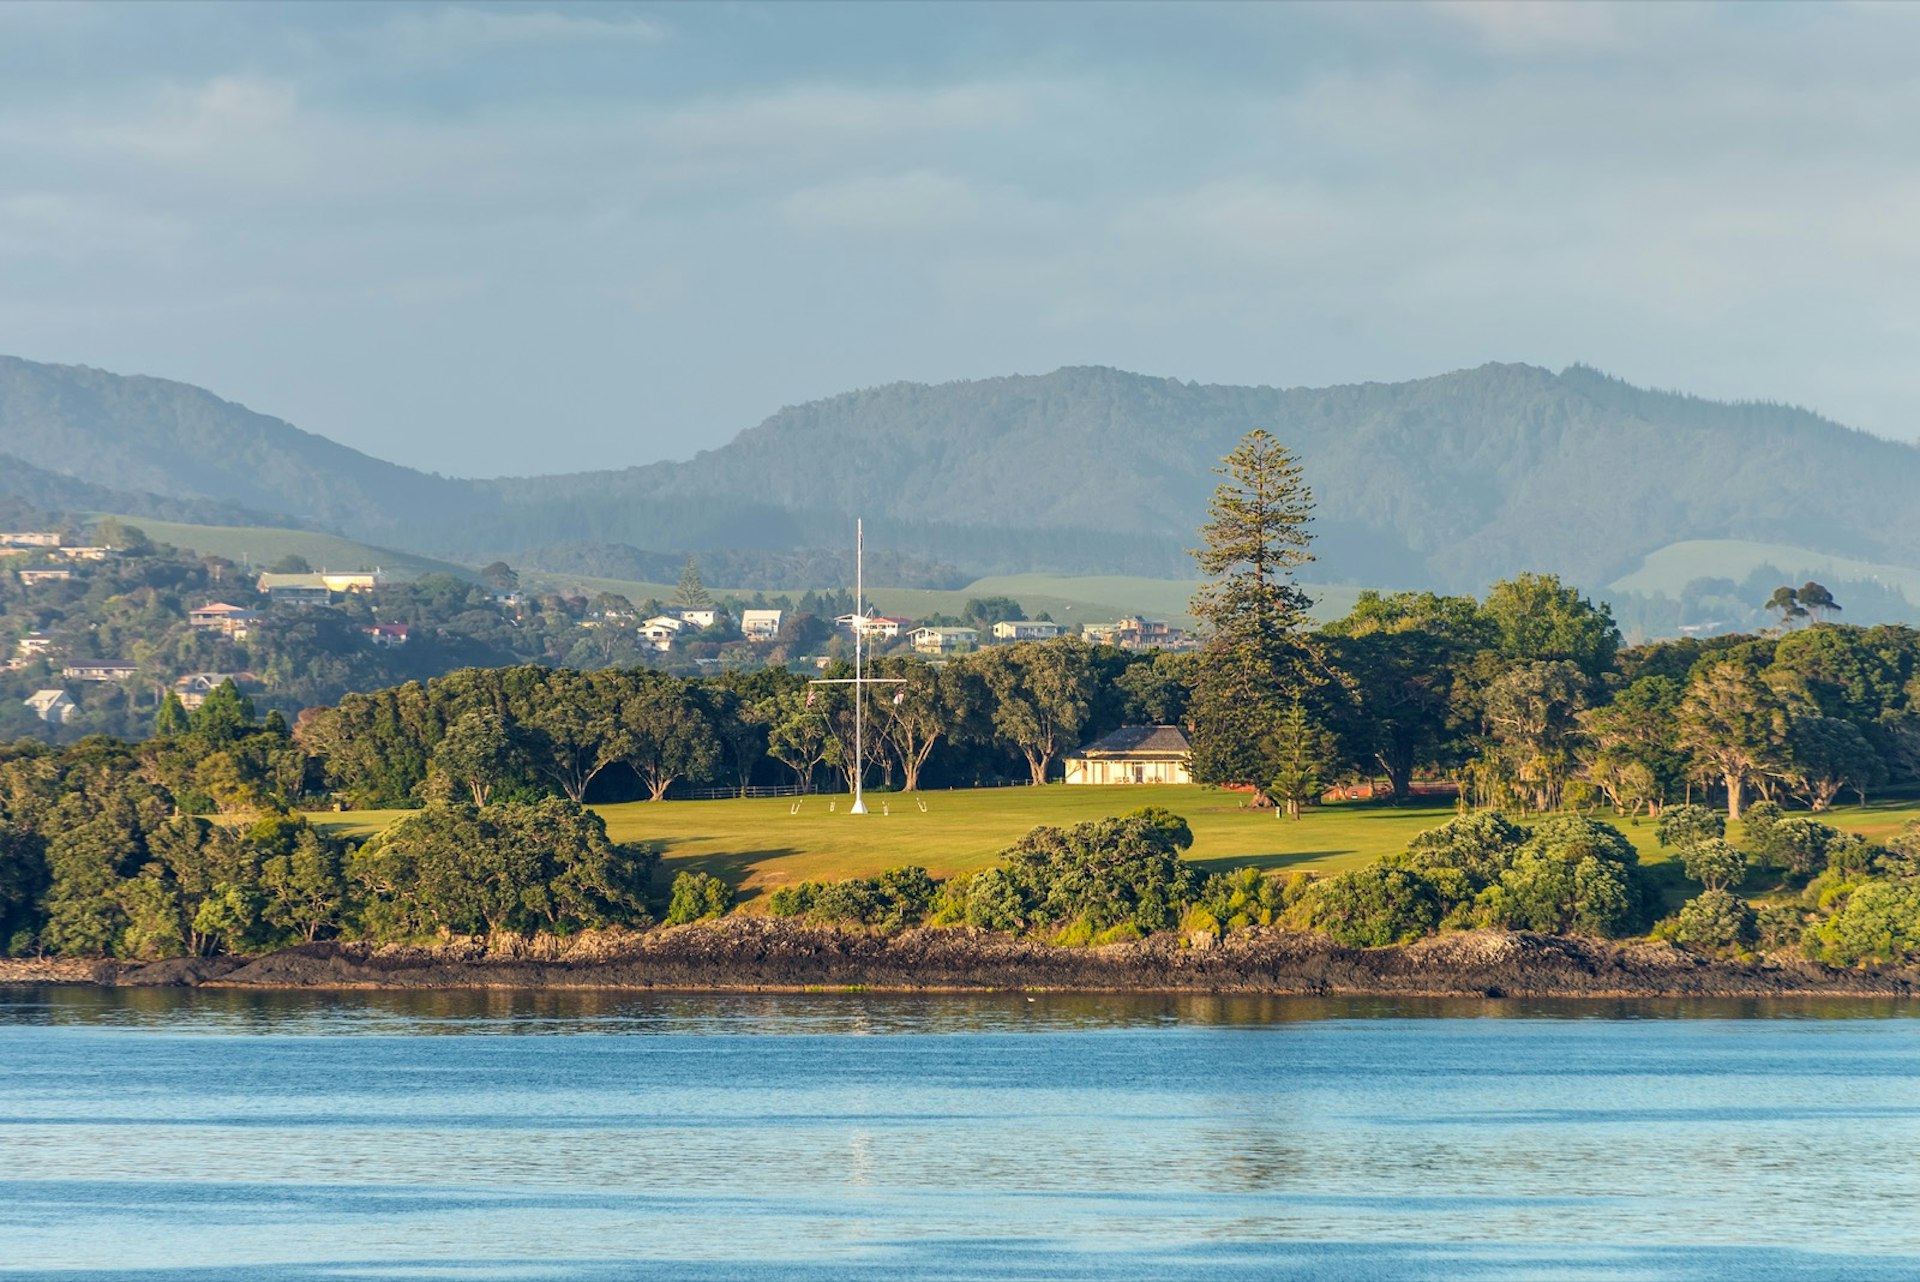 In the foreground are calm ocean waters; they abut a rocky, tree-lined shore that makes way to a lush lawn that is home to a large flagpole and single building nestled among trees; forested hills dotted with homes fill the background; the scene is the Waitangi treaty grounds in Paihia, Northland, New Zealand